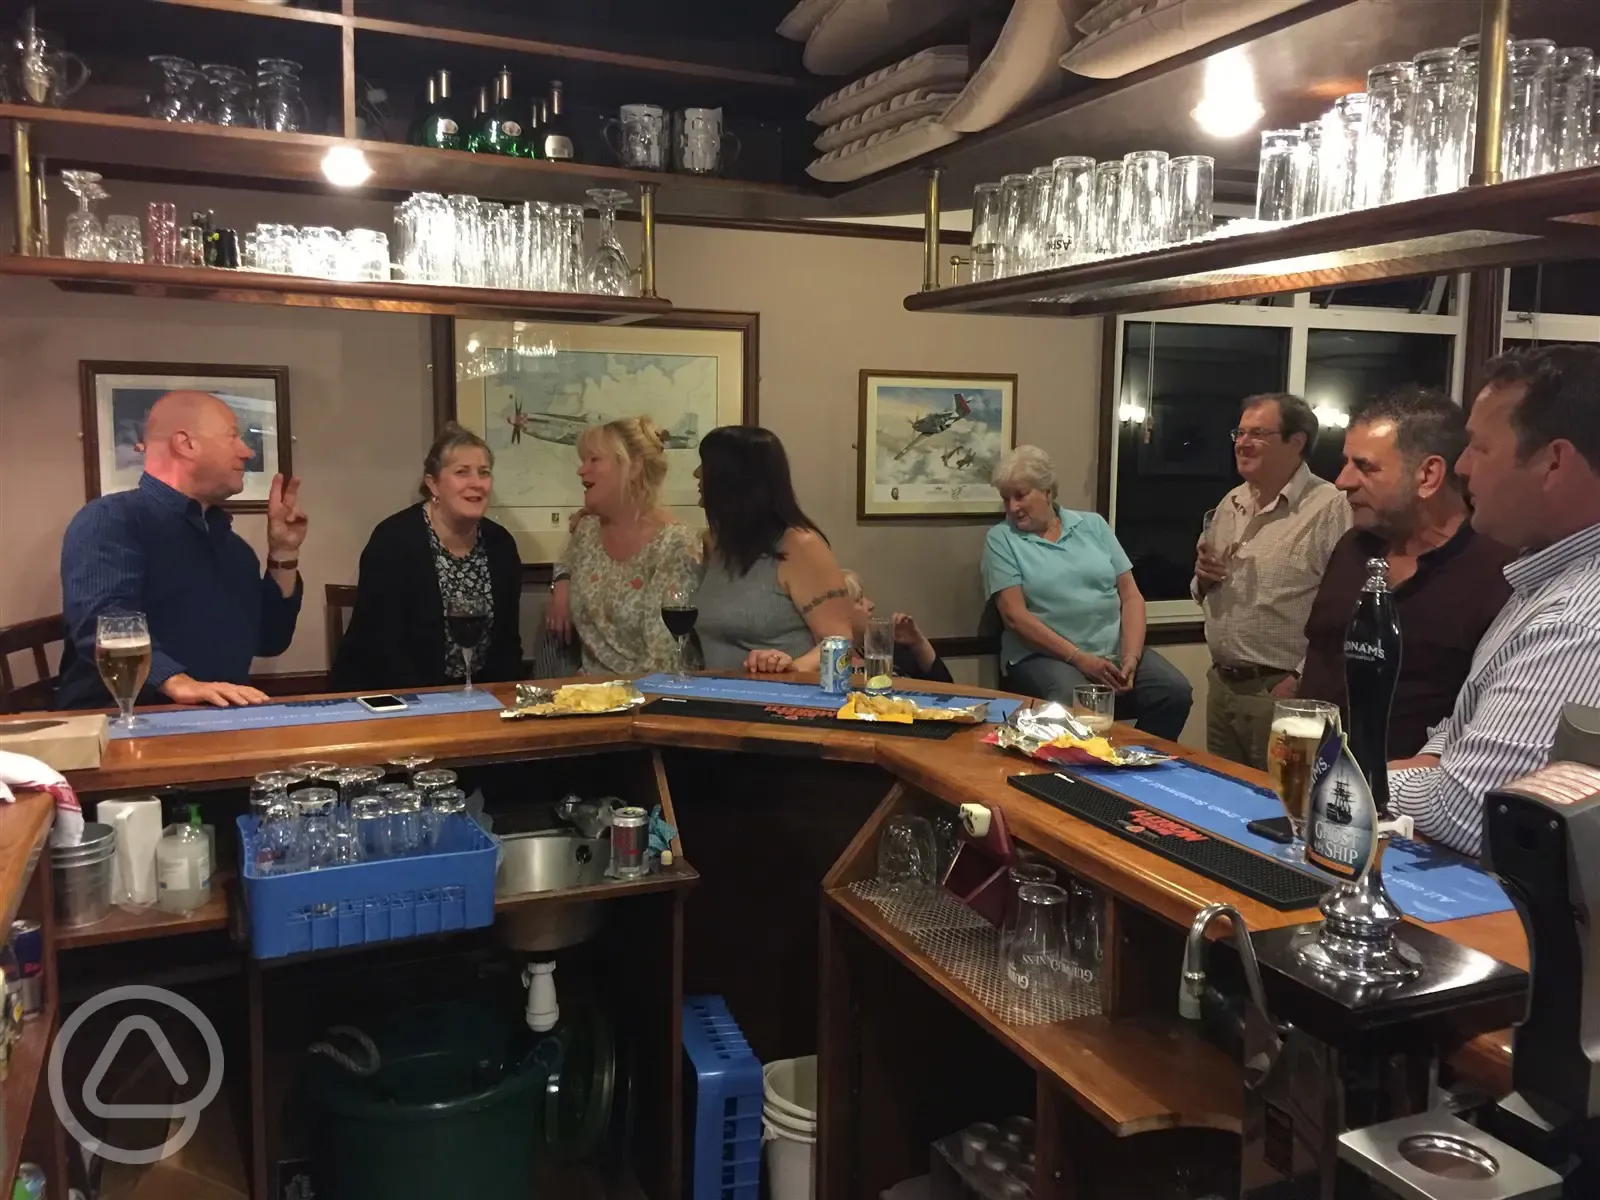 Our small on-site bar is popular with both owners and tourers. Offering great value for money and a warm welcoming atmosphere, we pride ourselves on our array local beers and cider.